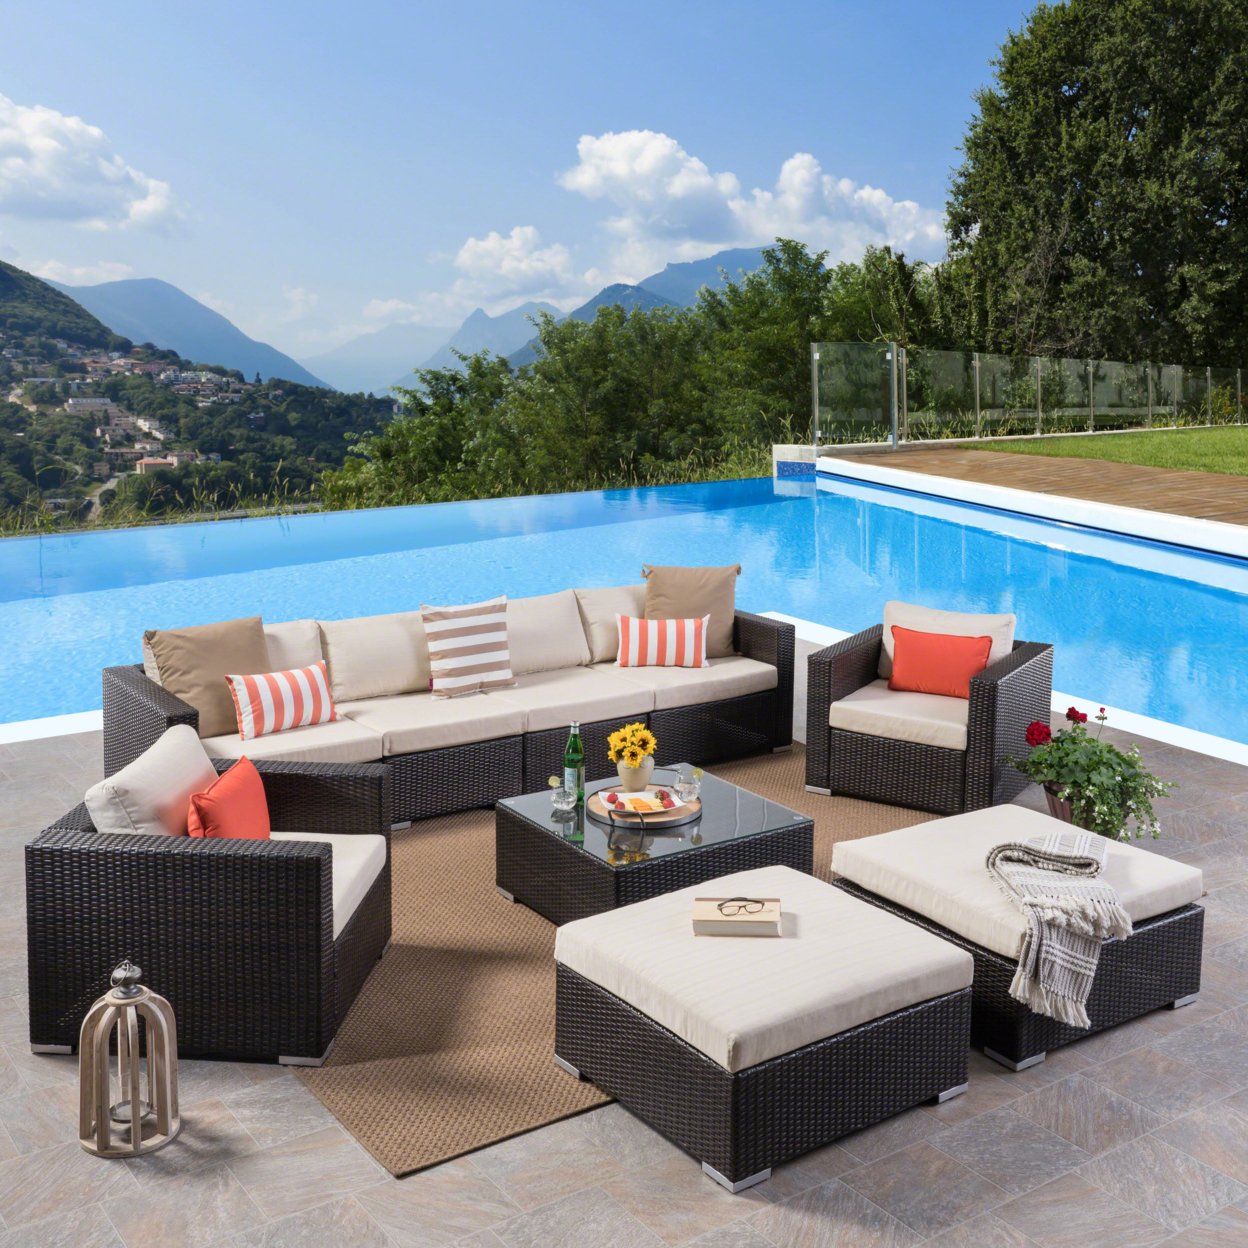 Karl Outdoor 6 Seater Wicker Sectional With Aluminum Frame - Gray